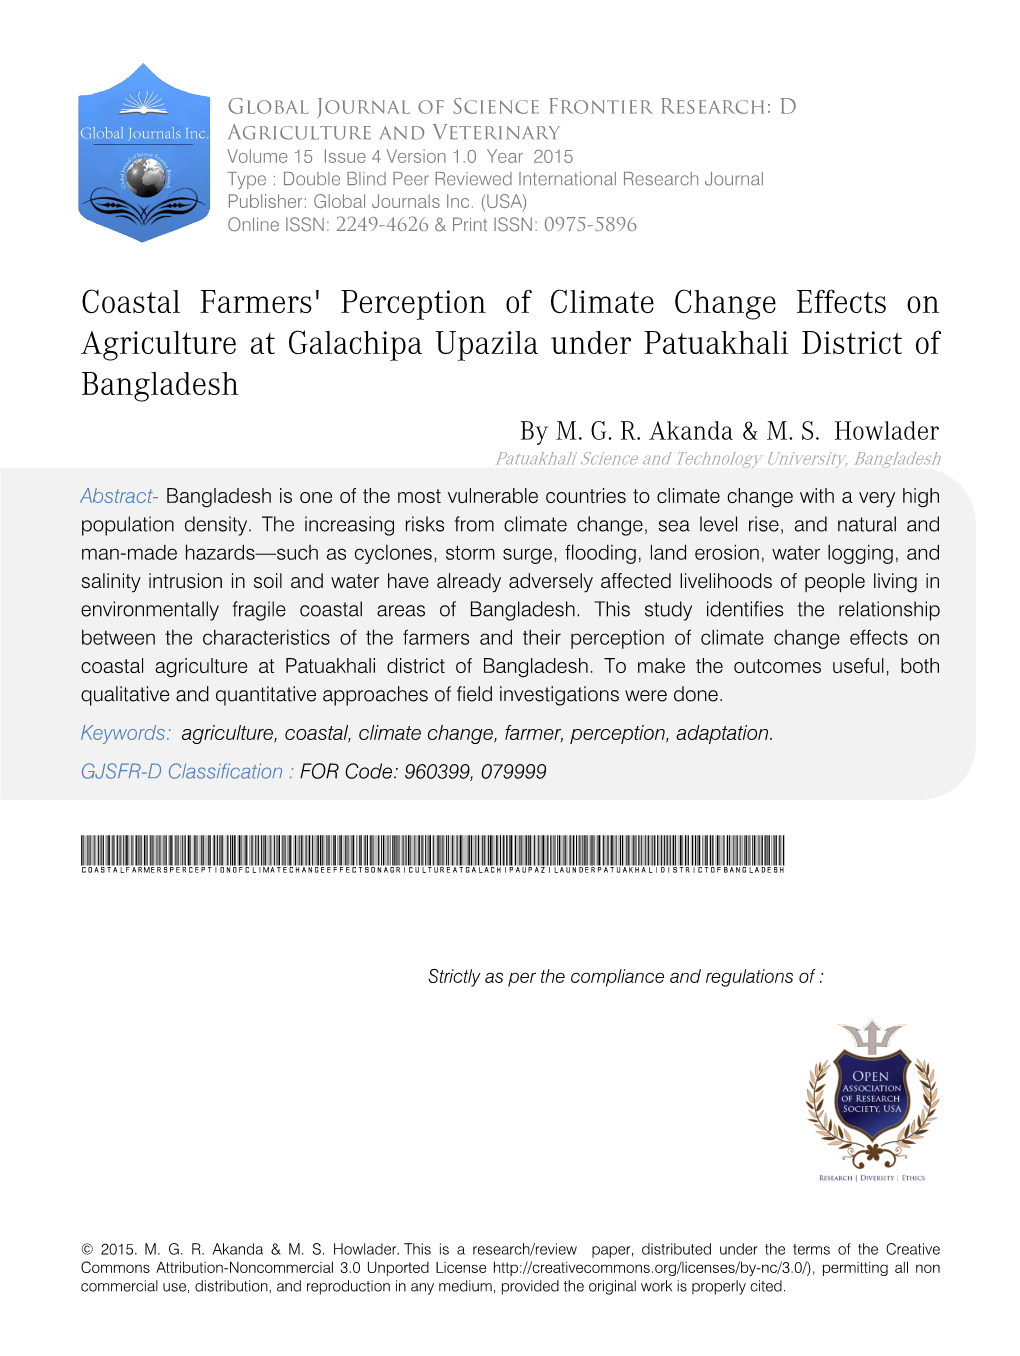 Coastal Farmers' Perception of Climate Change Effects on Agriculture at Galachipa Upazila Under Patuakhali District of Bangladesh by M